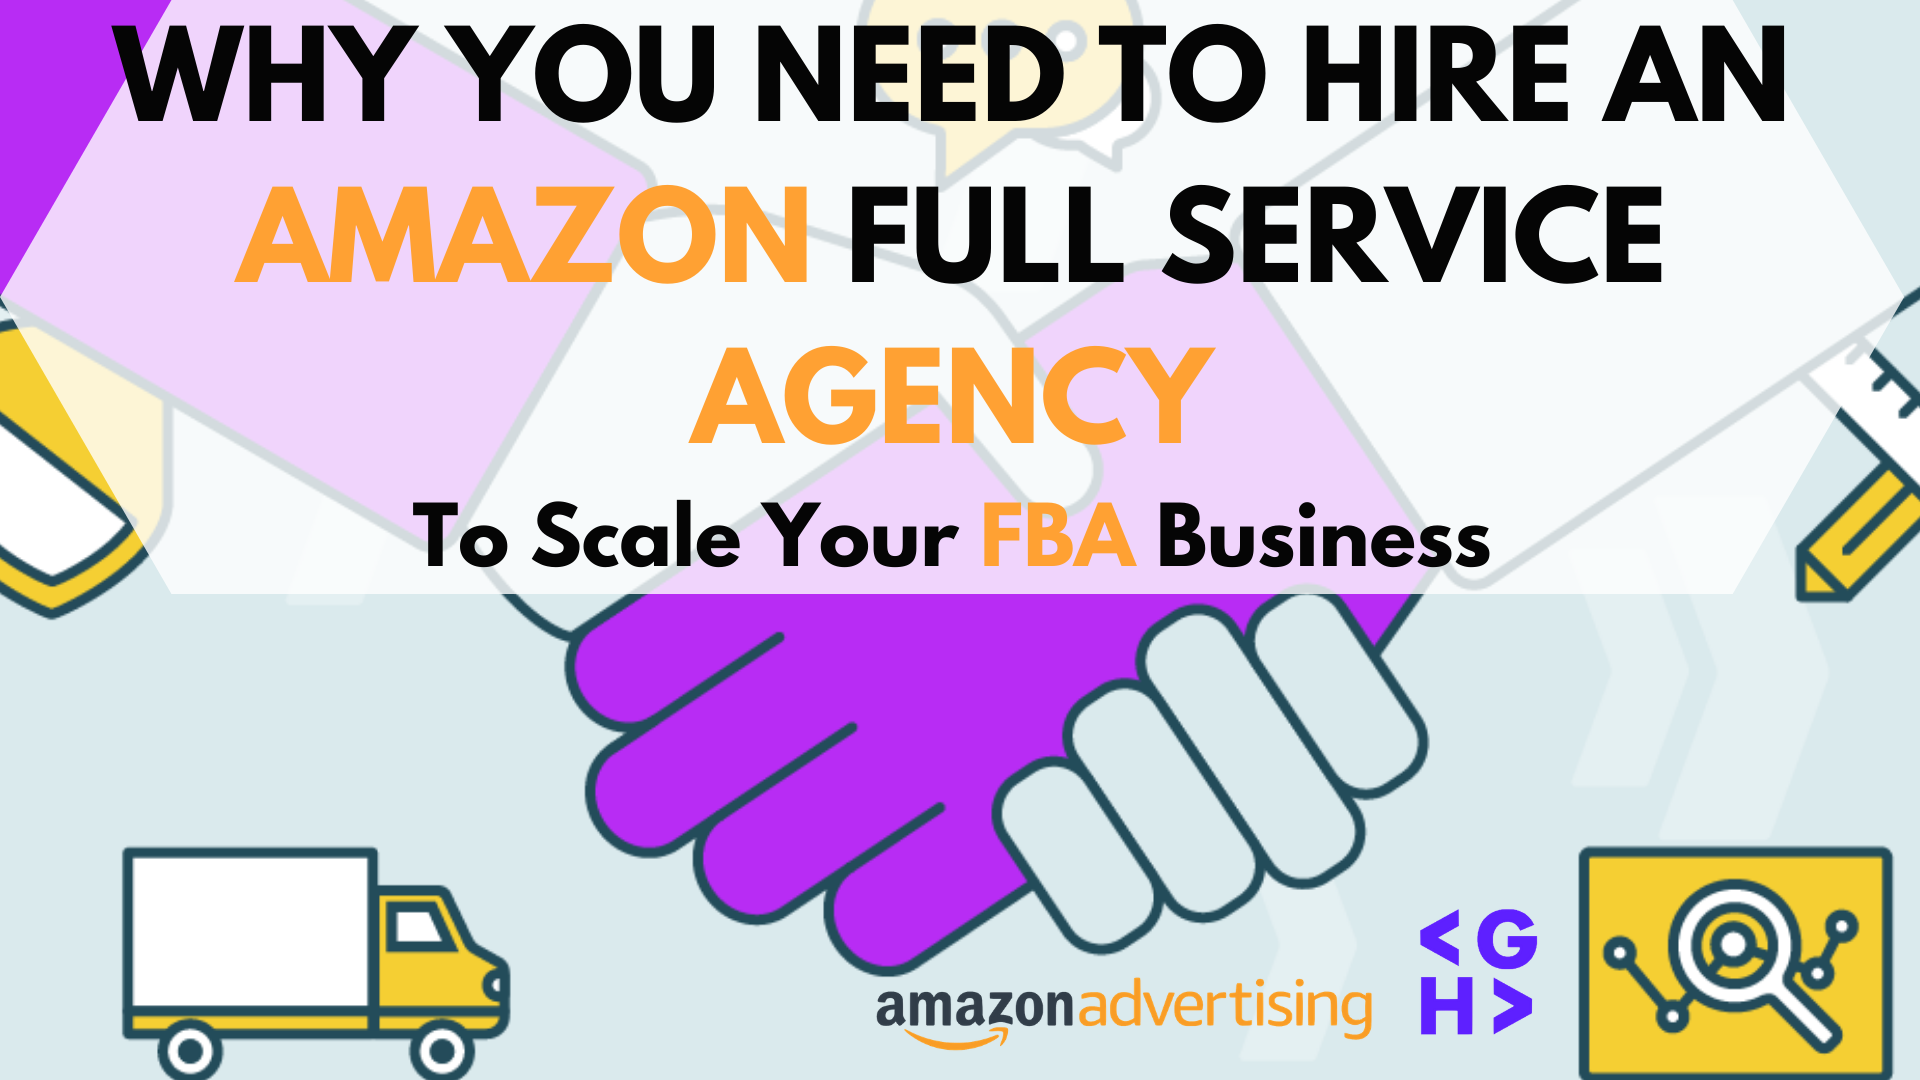 Why Should You Hire an Amazon Full Service Agency To Scale Your FBA Business – Updated 2023